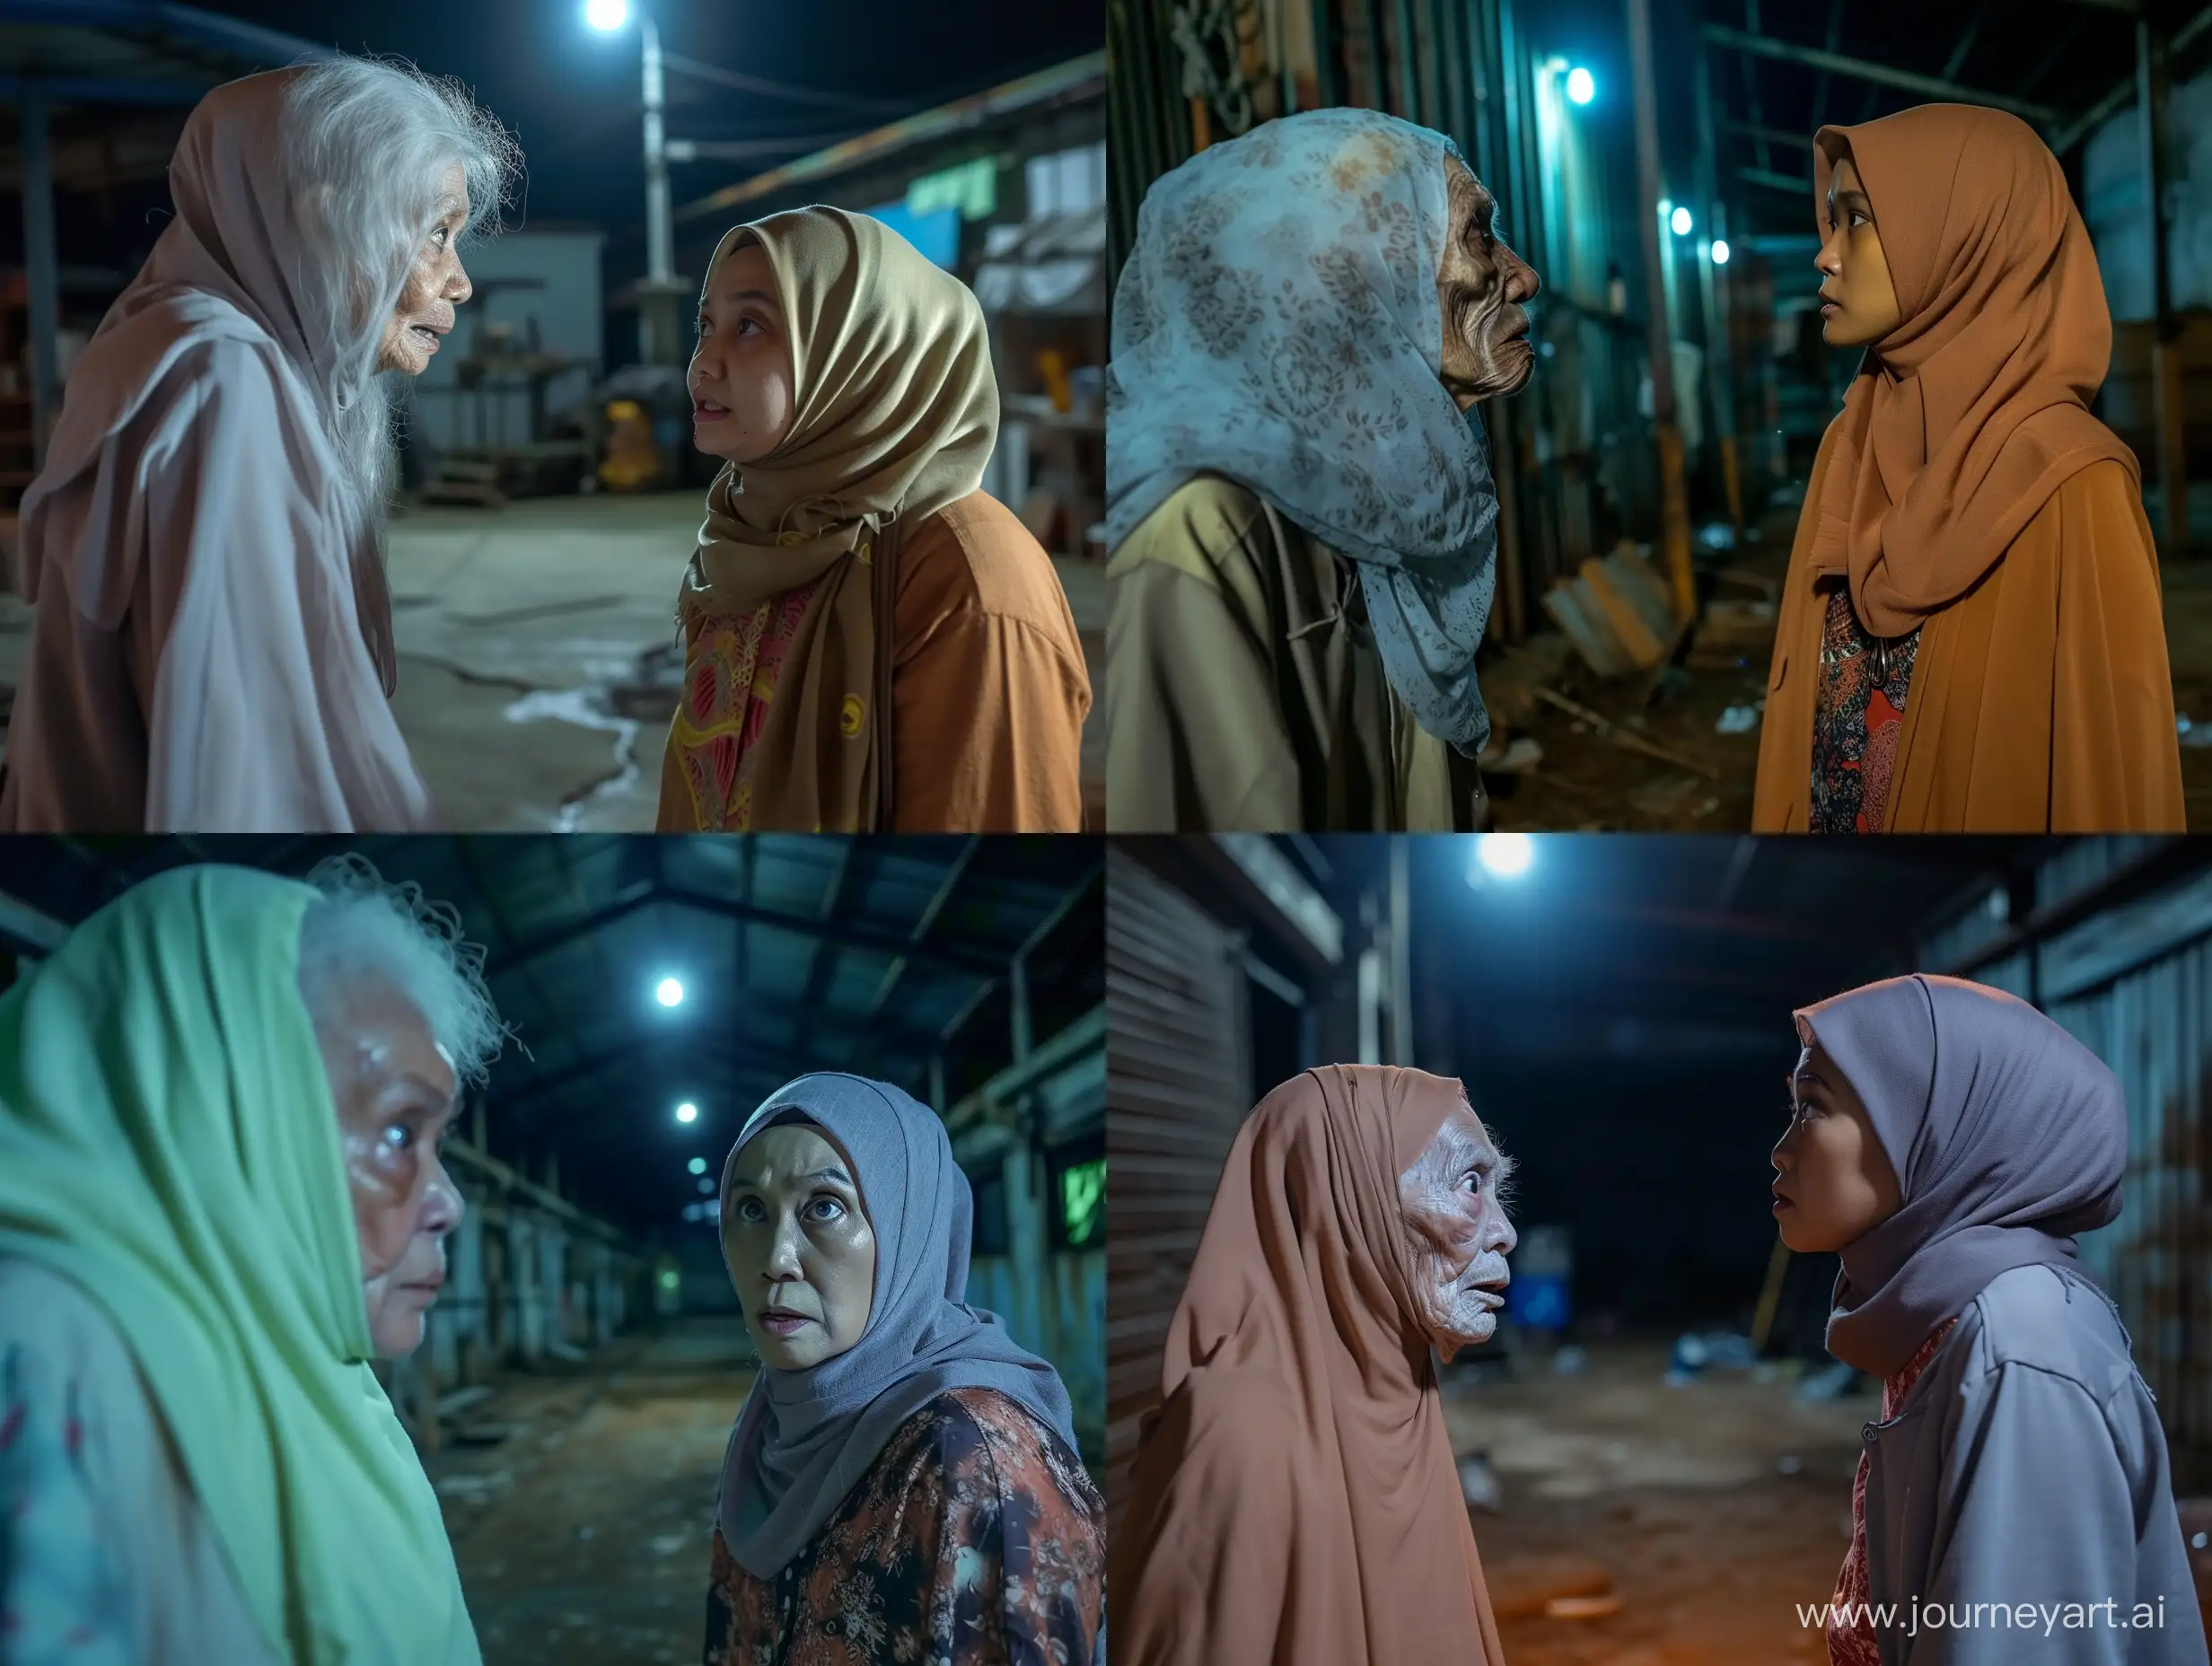 The ghost of and old grandmother is peeking at an indonesian hijab wearing woman, in a dirty house warehouse at night , horor movie scene